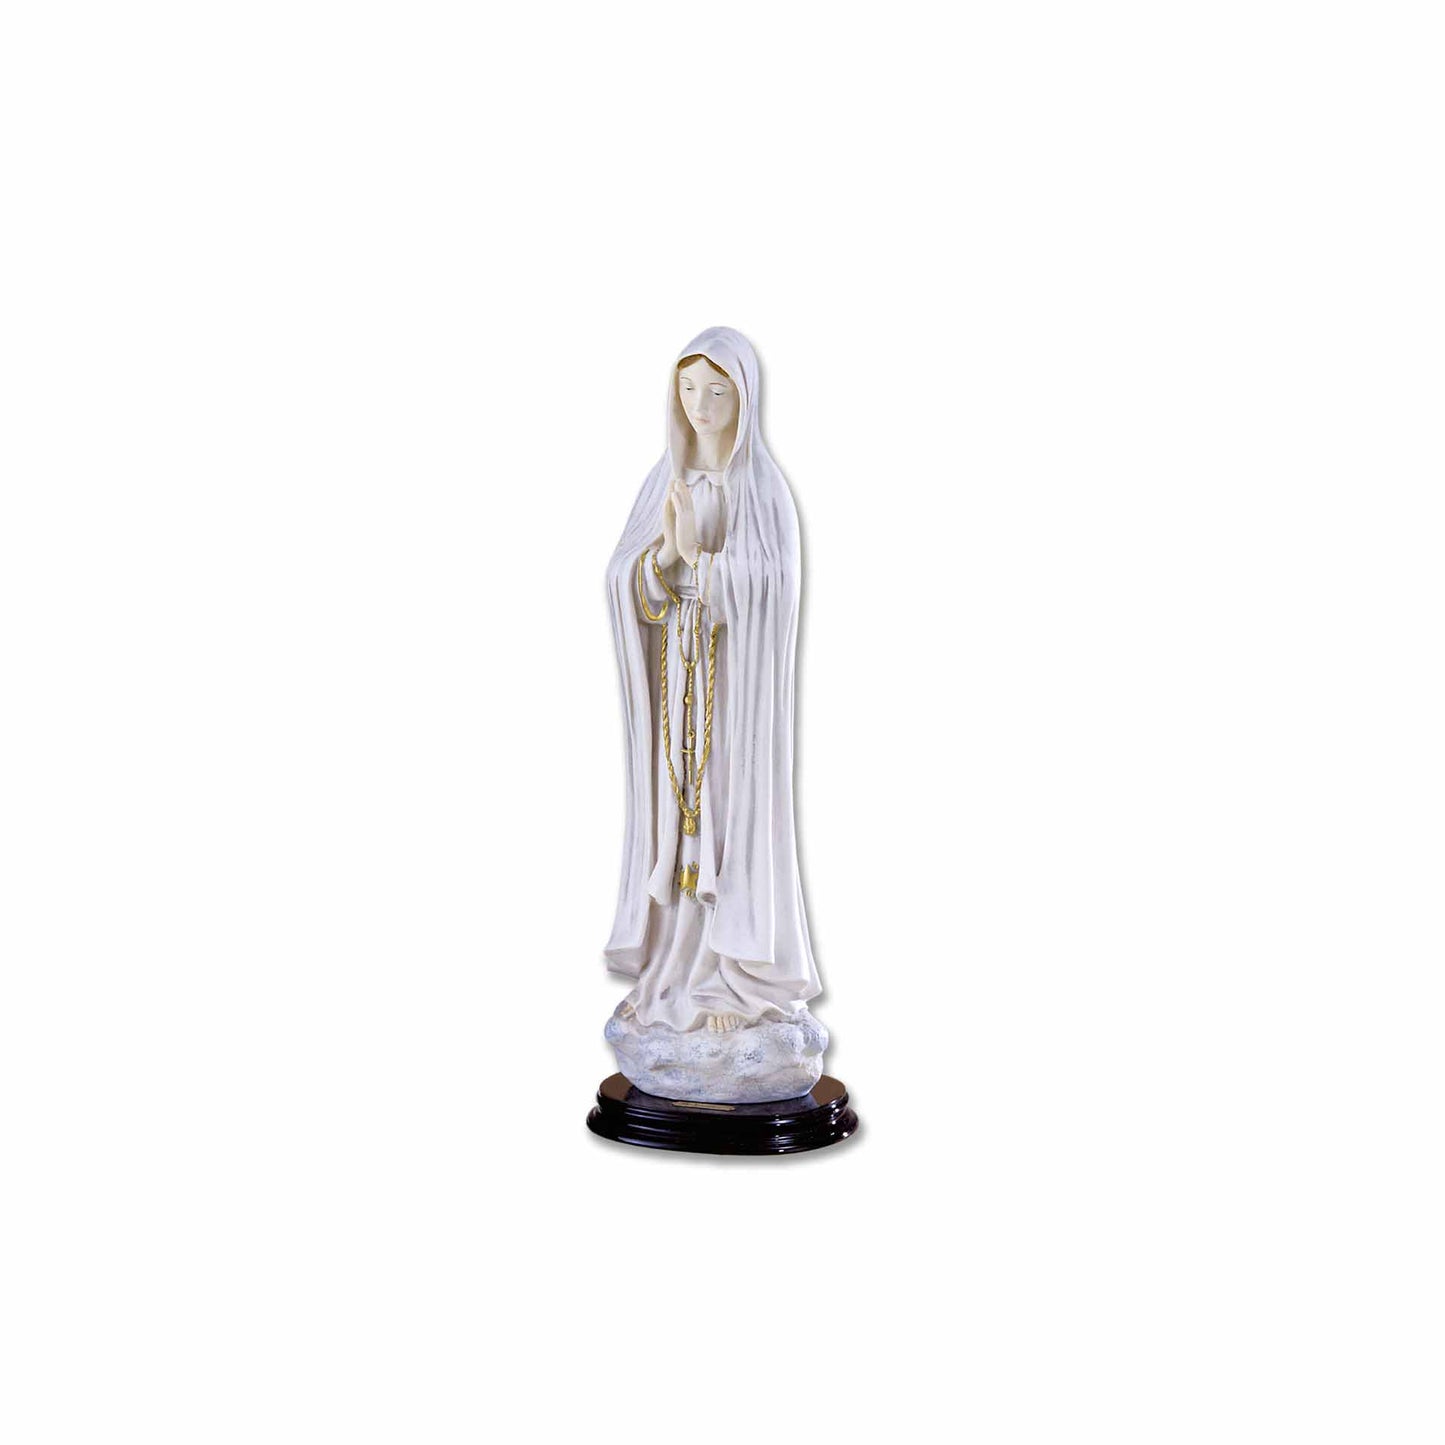 Lady of Fatima statue made of Marble Dust 7.8 inches